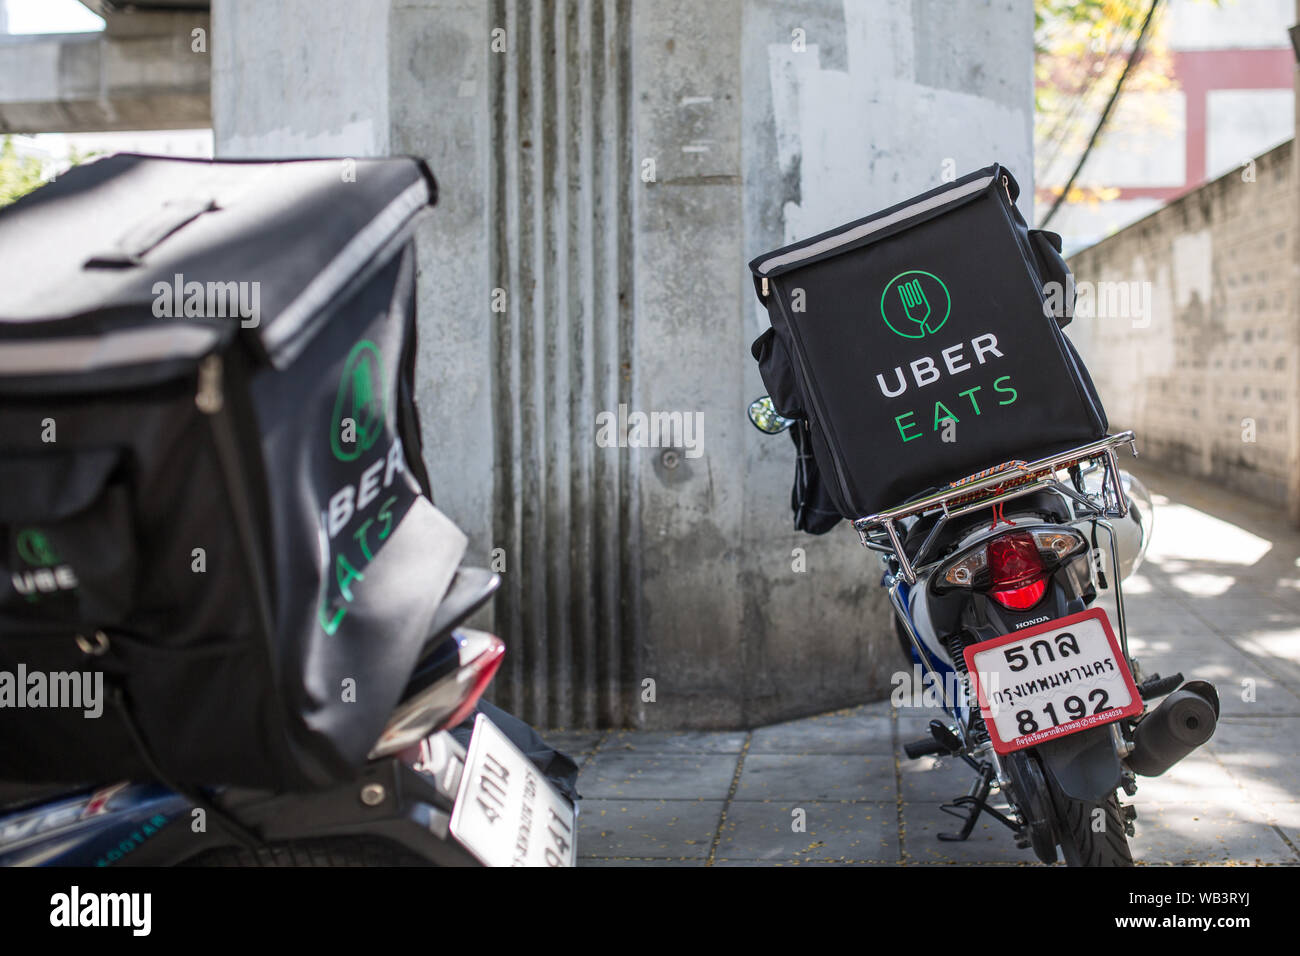 BANGKOK, THAILAND - JANUARY 27, 2017: An Uber Eats two motor scooter parked on the side of the road. Stock Photo